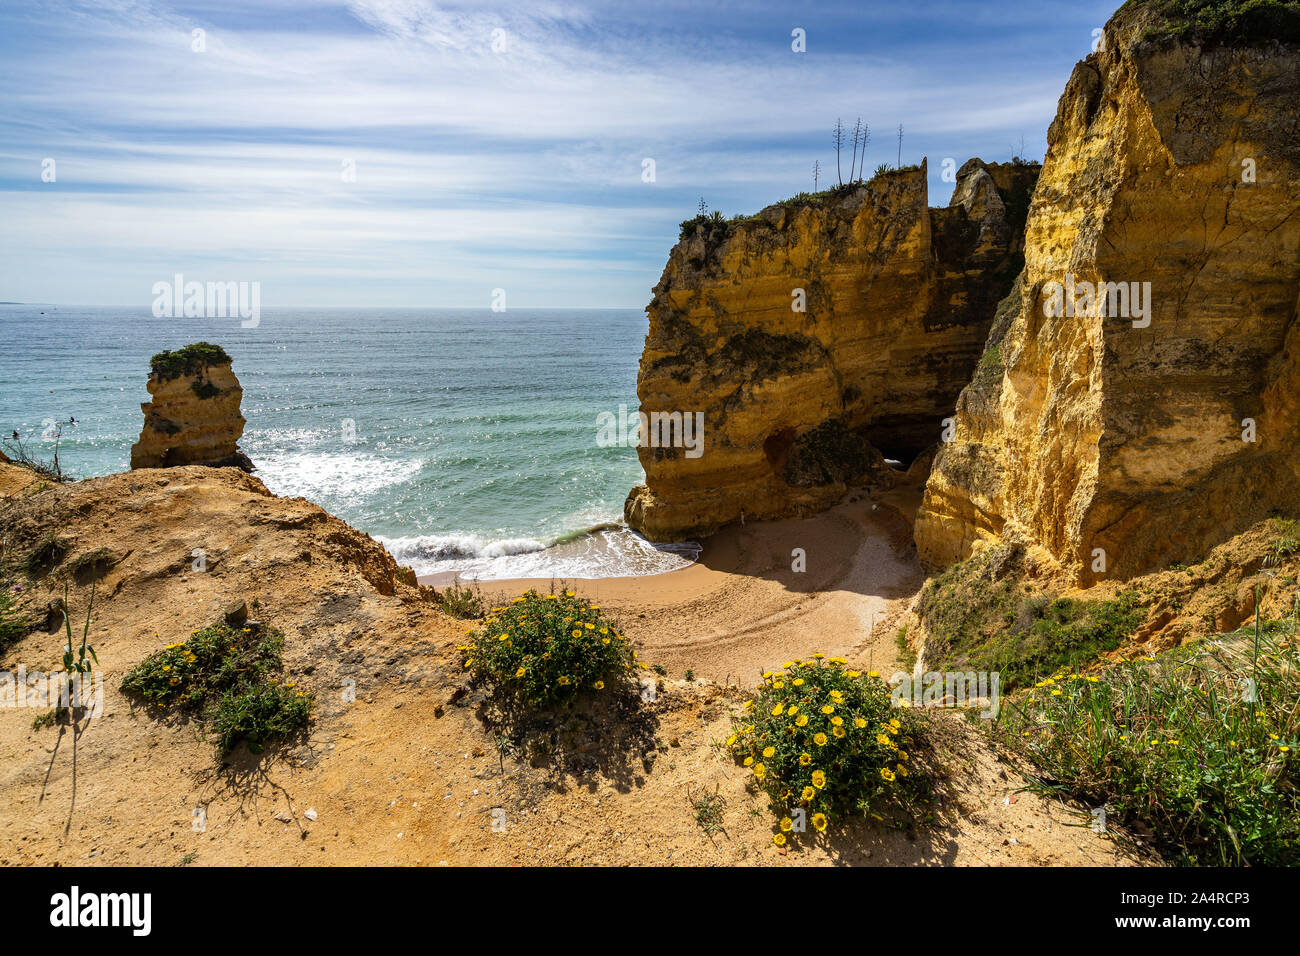 Panoramic view from cliffs of Praia dos Estudiantes (Student Beach), one of the finest beach near Lagos, Algarve, Portugal Stock Photo